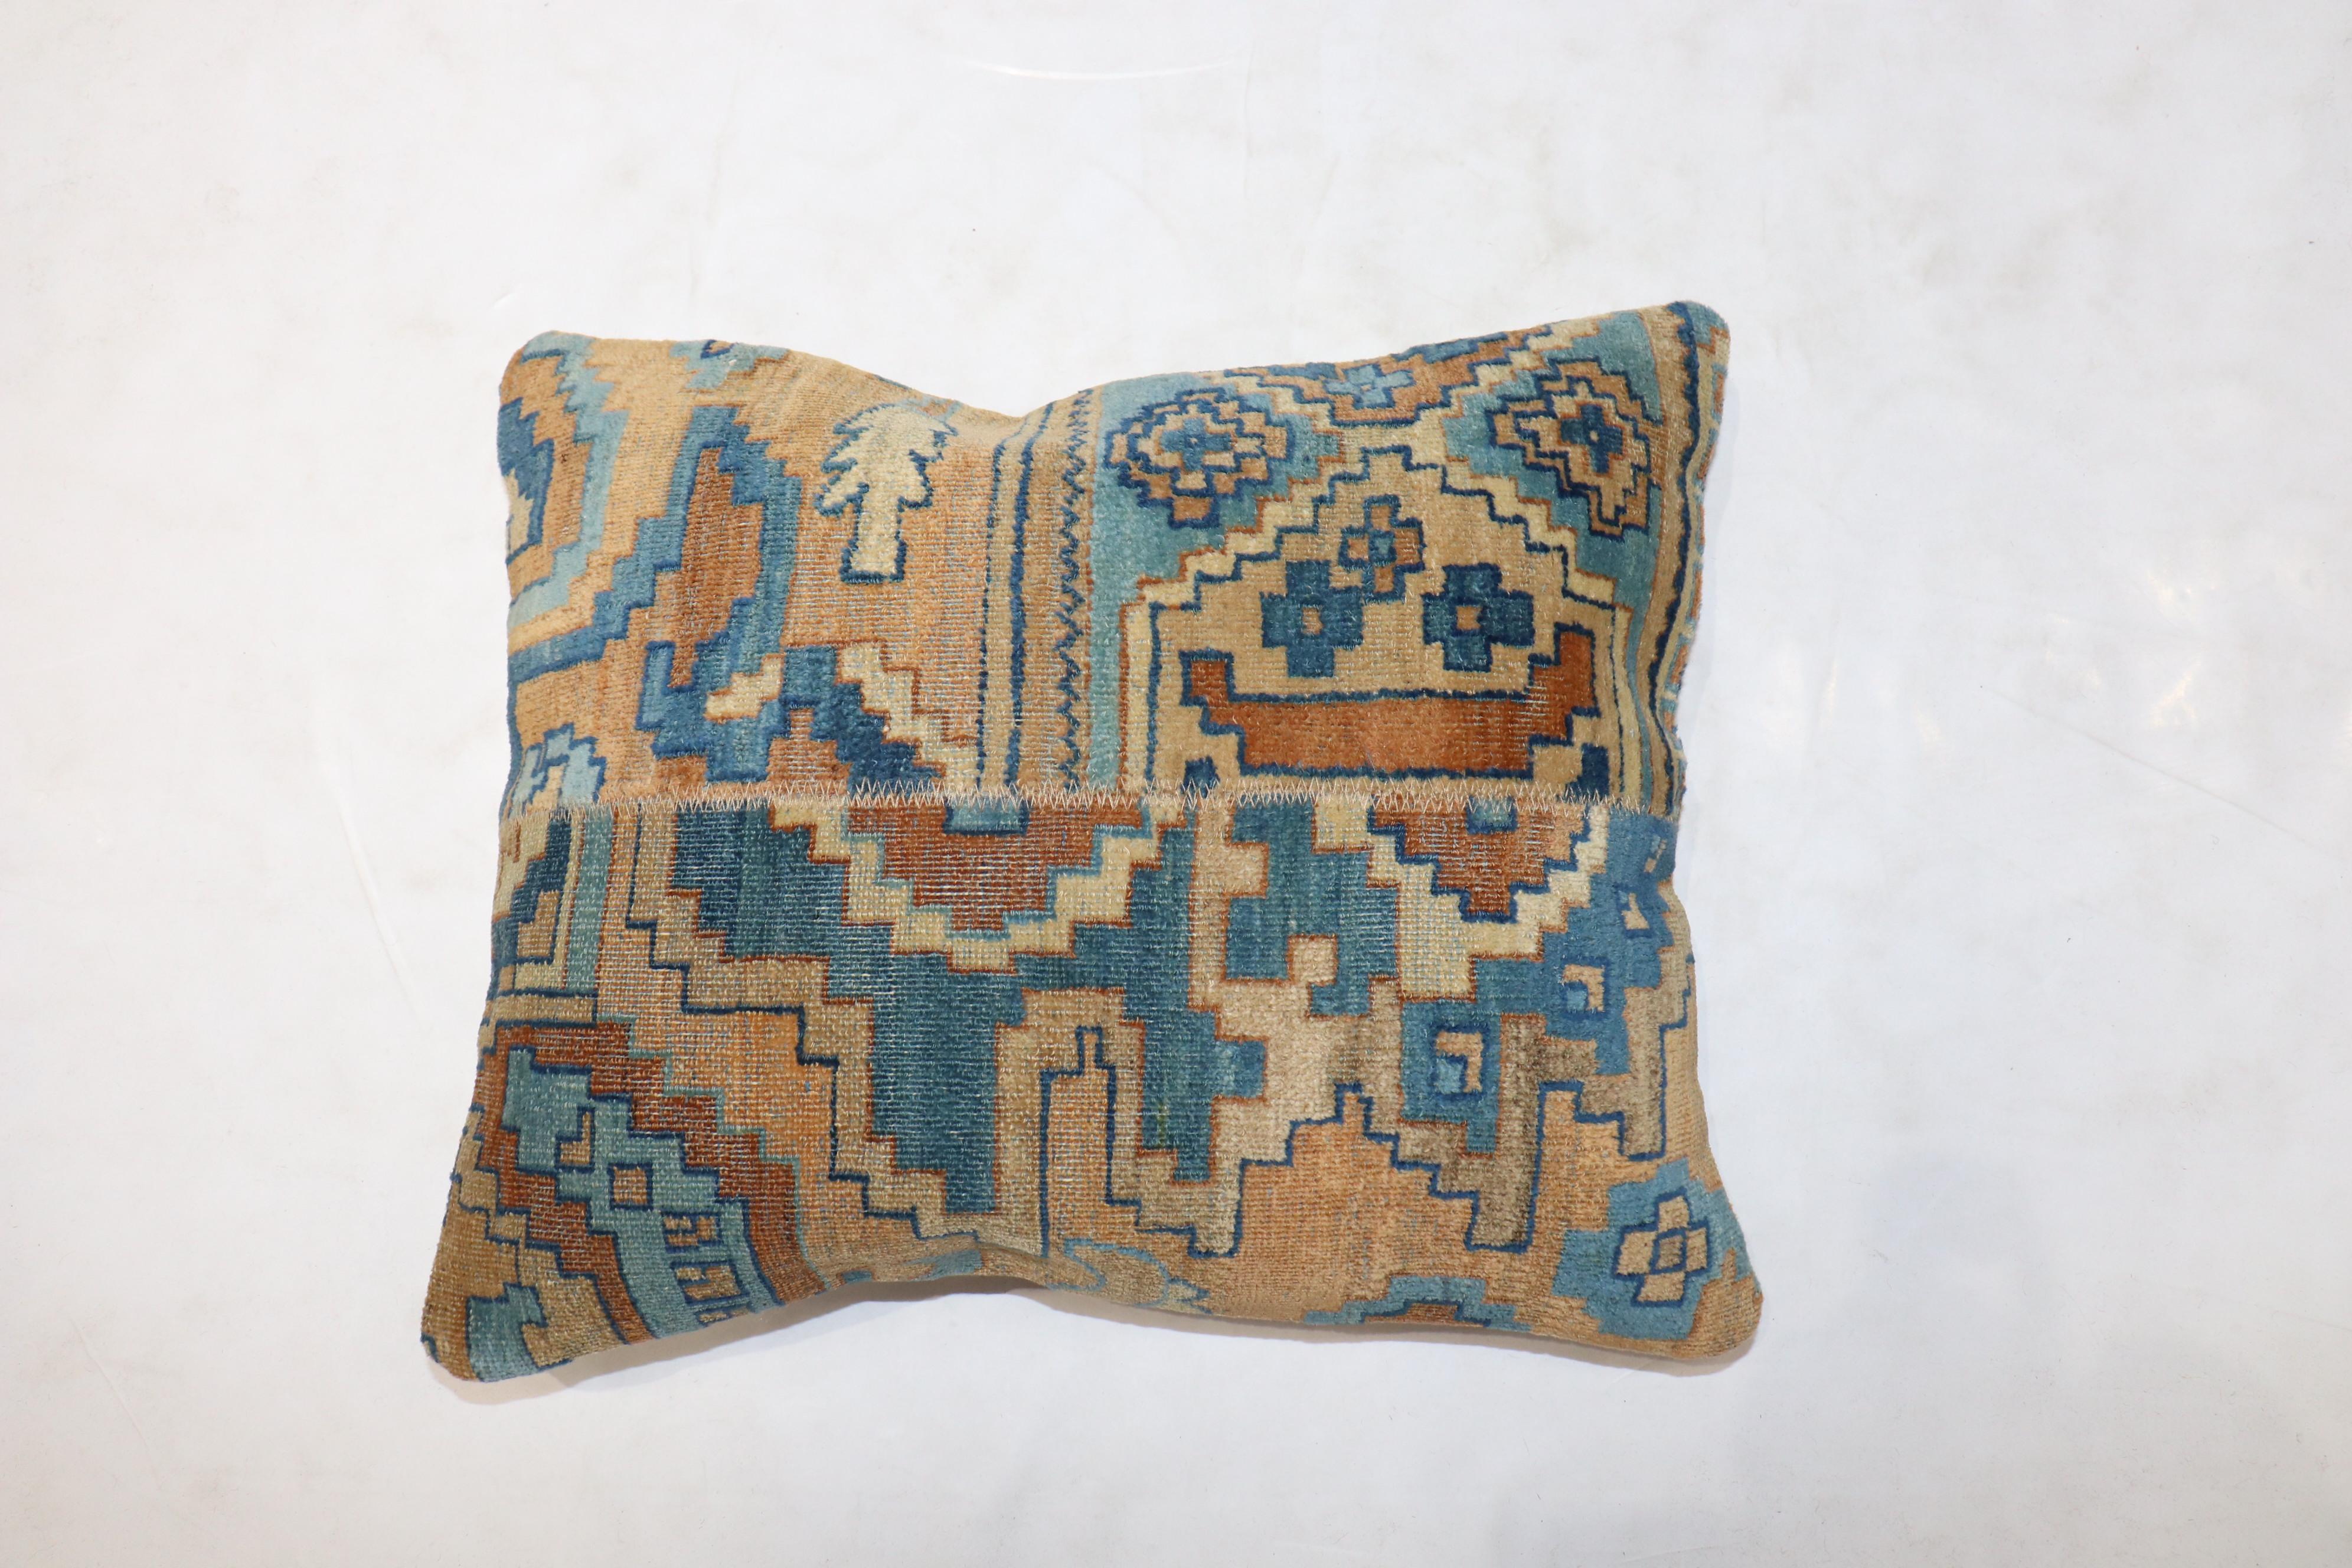 Pillow made from an antique Indian Agra rug zipper closure and polyfill insert provided

Measures 16'' x 20''.